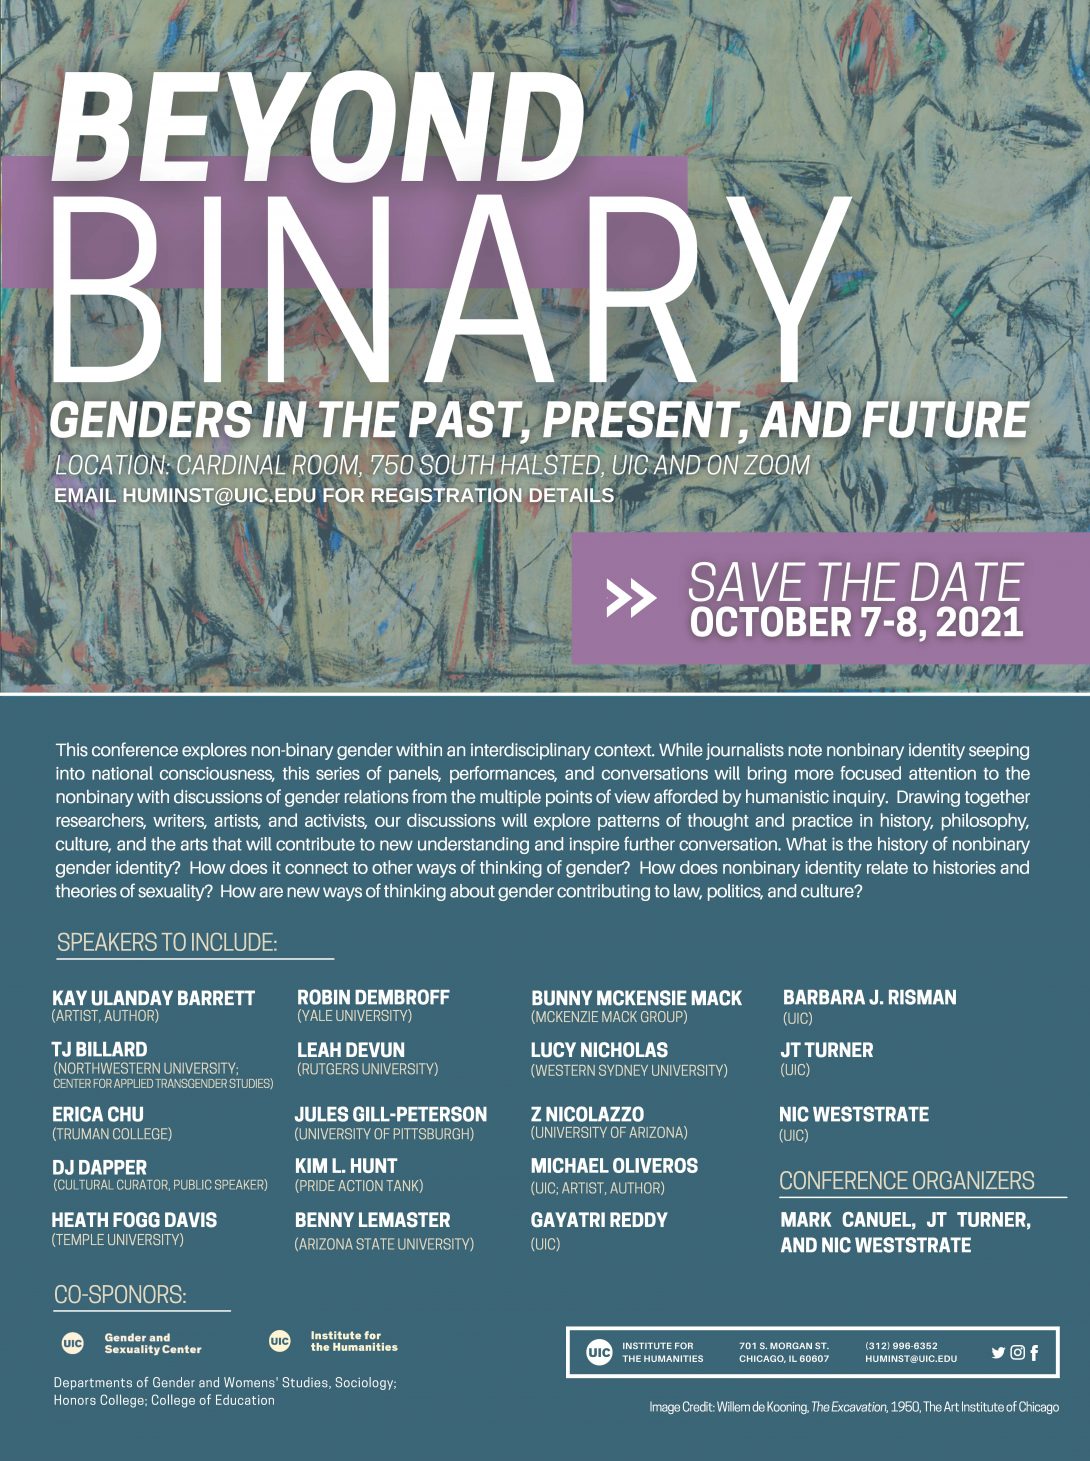 Beyond Binary conference flyer featuring The Excavation by Willem de Kooning in the background of text describing the conference.